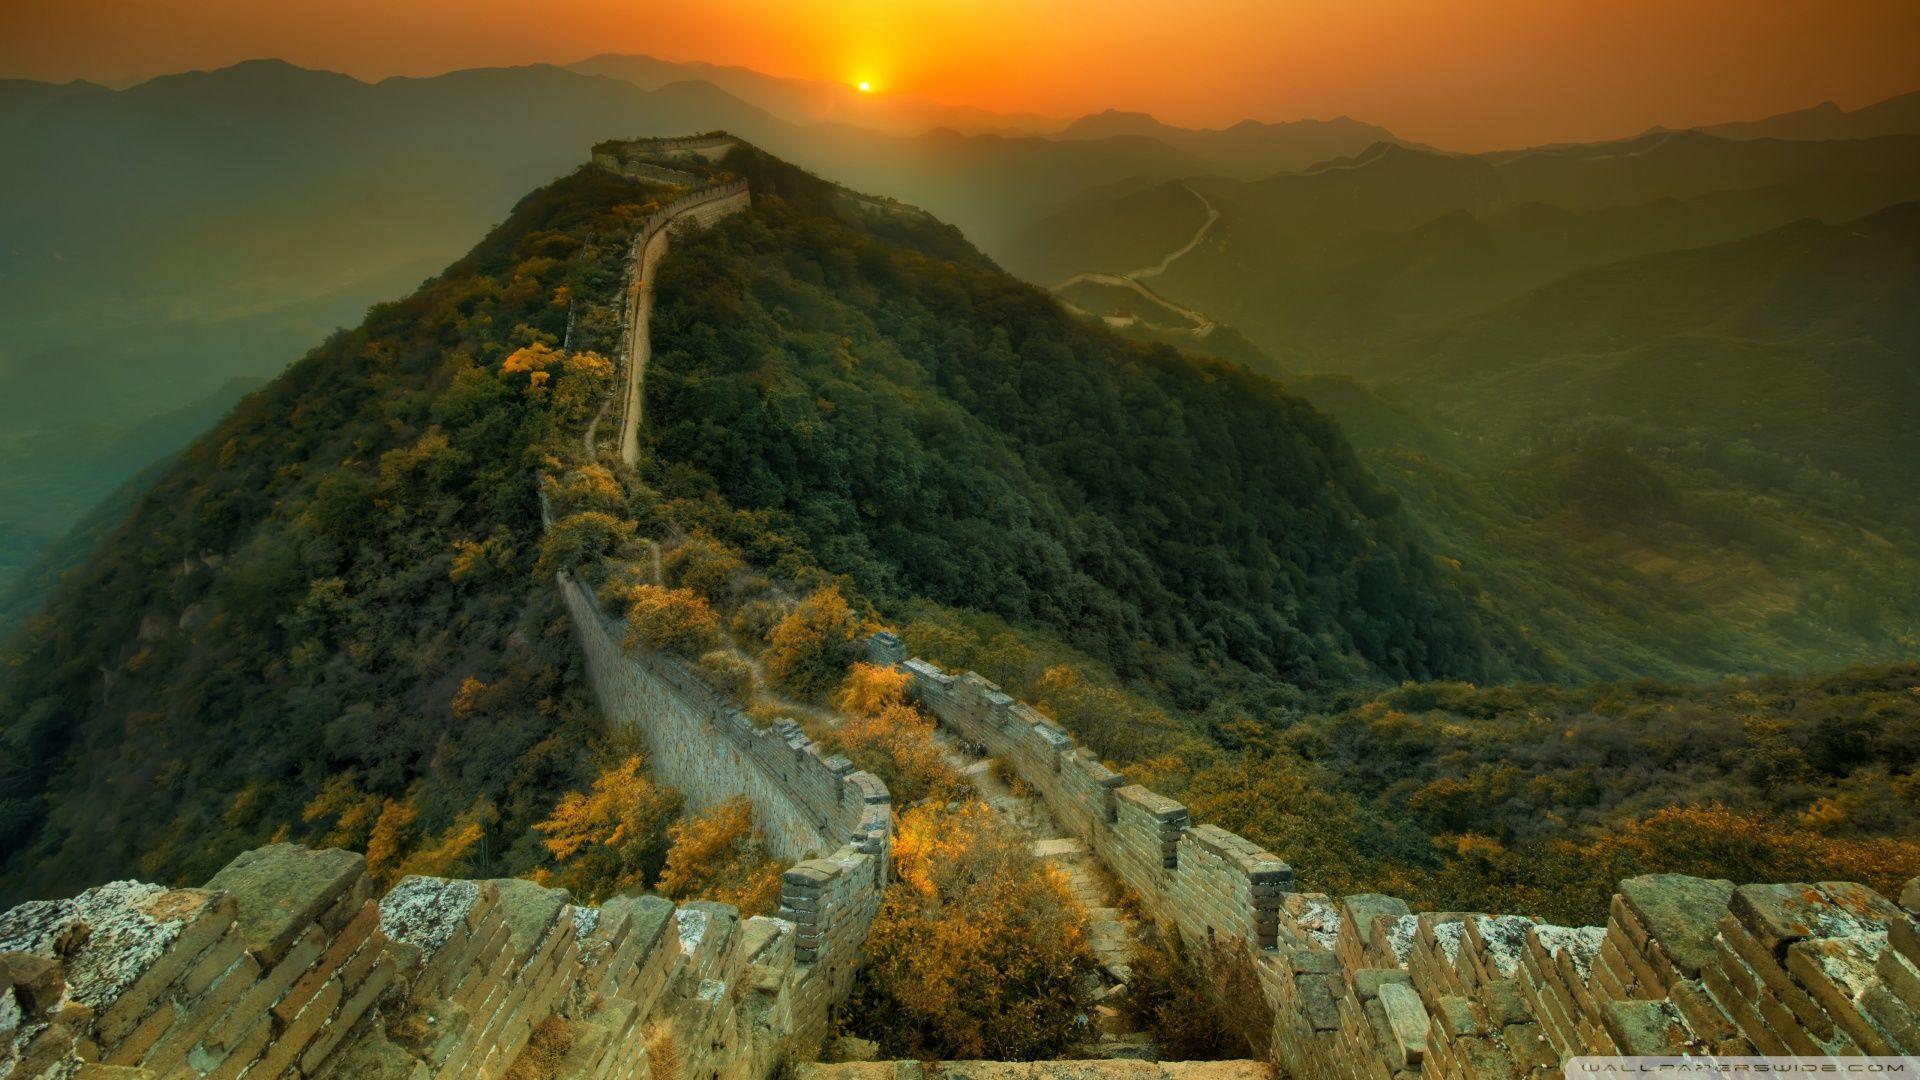 Chinese Landscape Wallpapers - Top Free Chinese Landscape Backgrounds